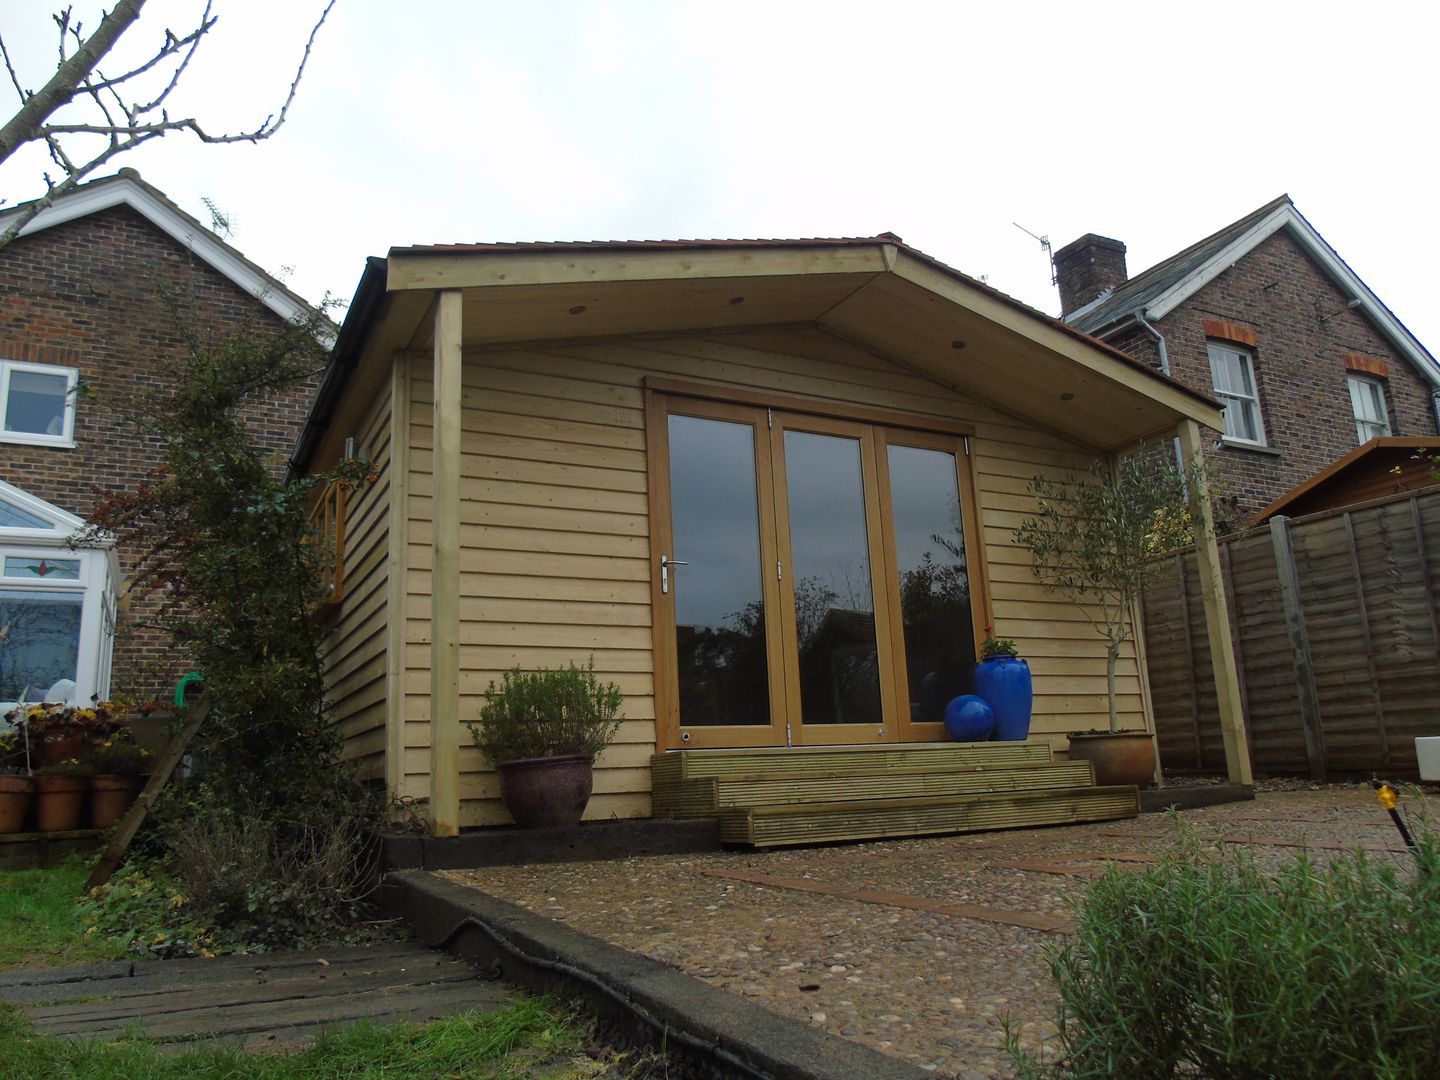 Pitched Roof Garden Office with Storage Miniature Manors Ltd Rustic style study/office garden room,summerhouse,garden office,workshop